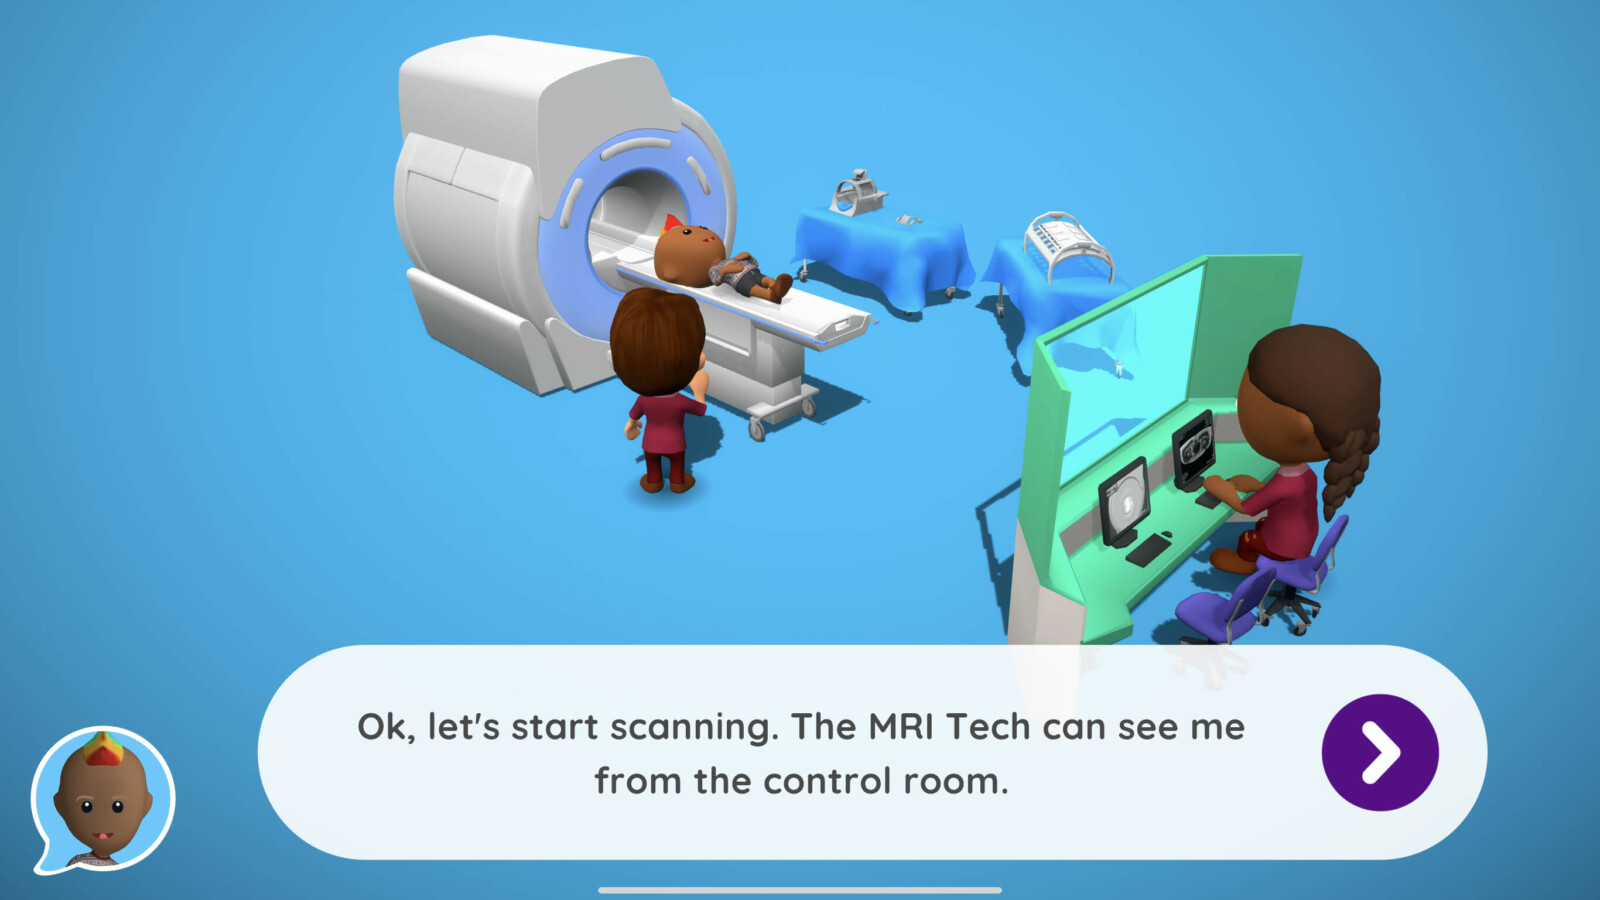 avatar explains that radiology tech can view patient on a monitor whilst having MRI scan